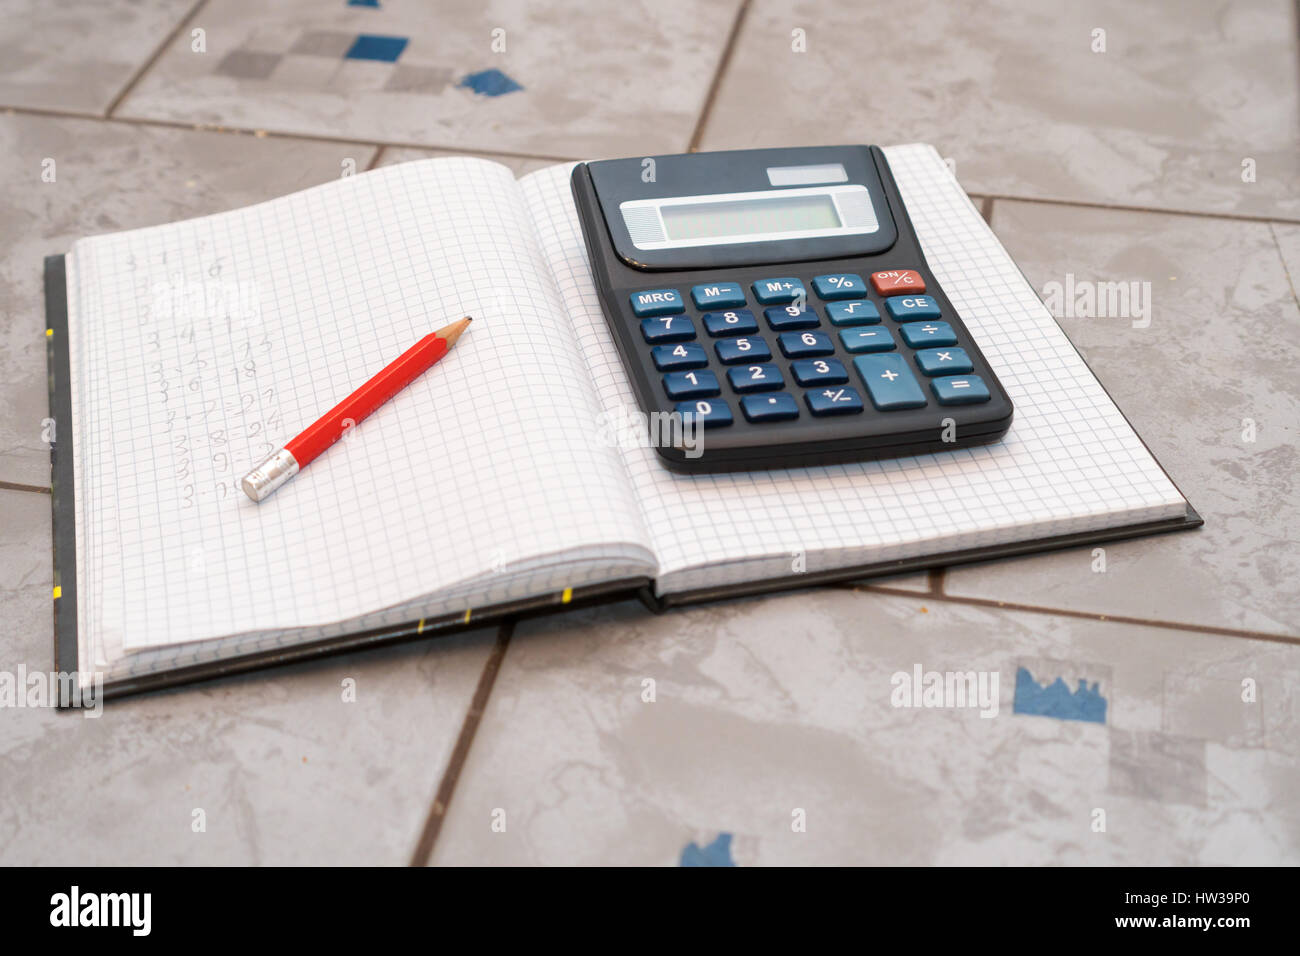 notebook in mathematics with handwriten exercise and a pencil and black calculator on ceramic surface desk Stock Photo